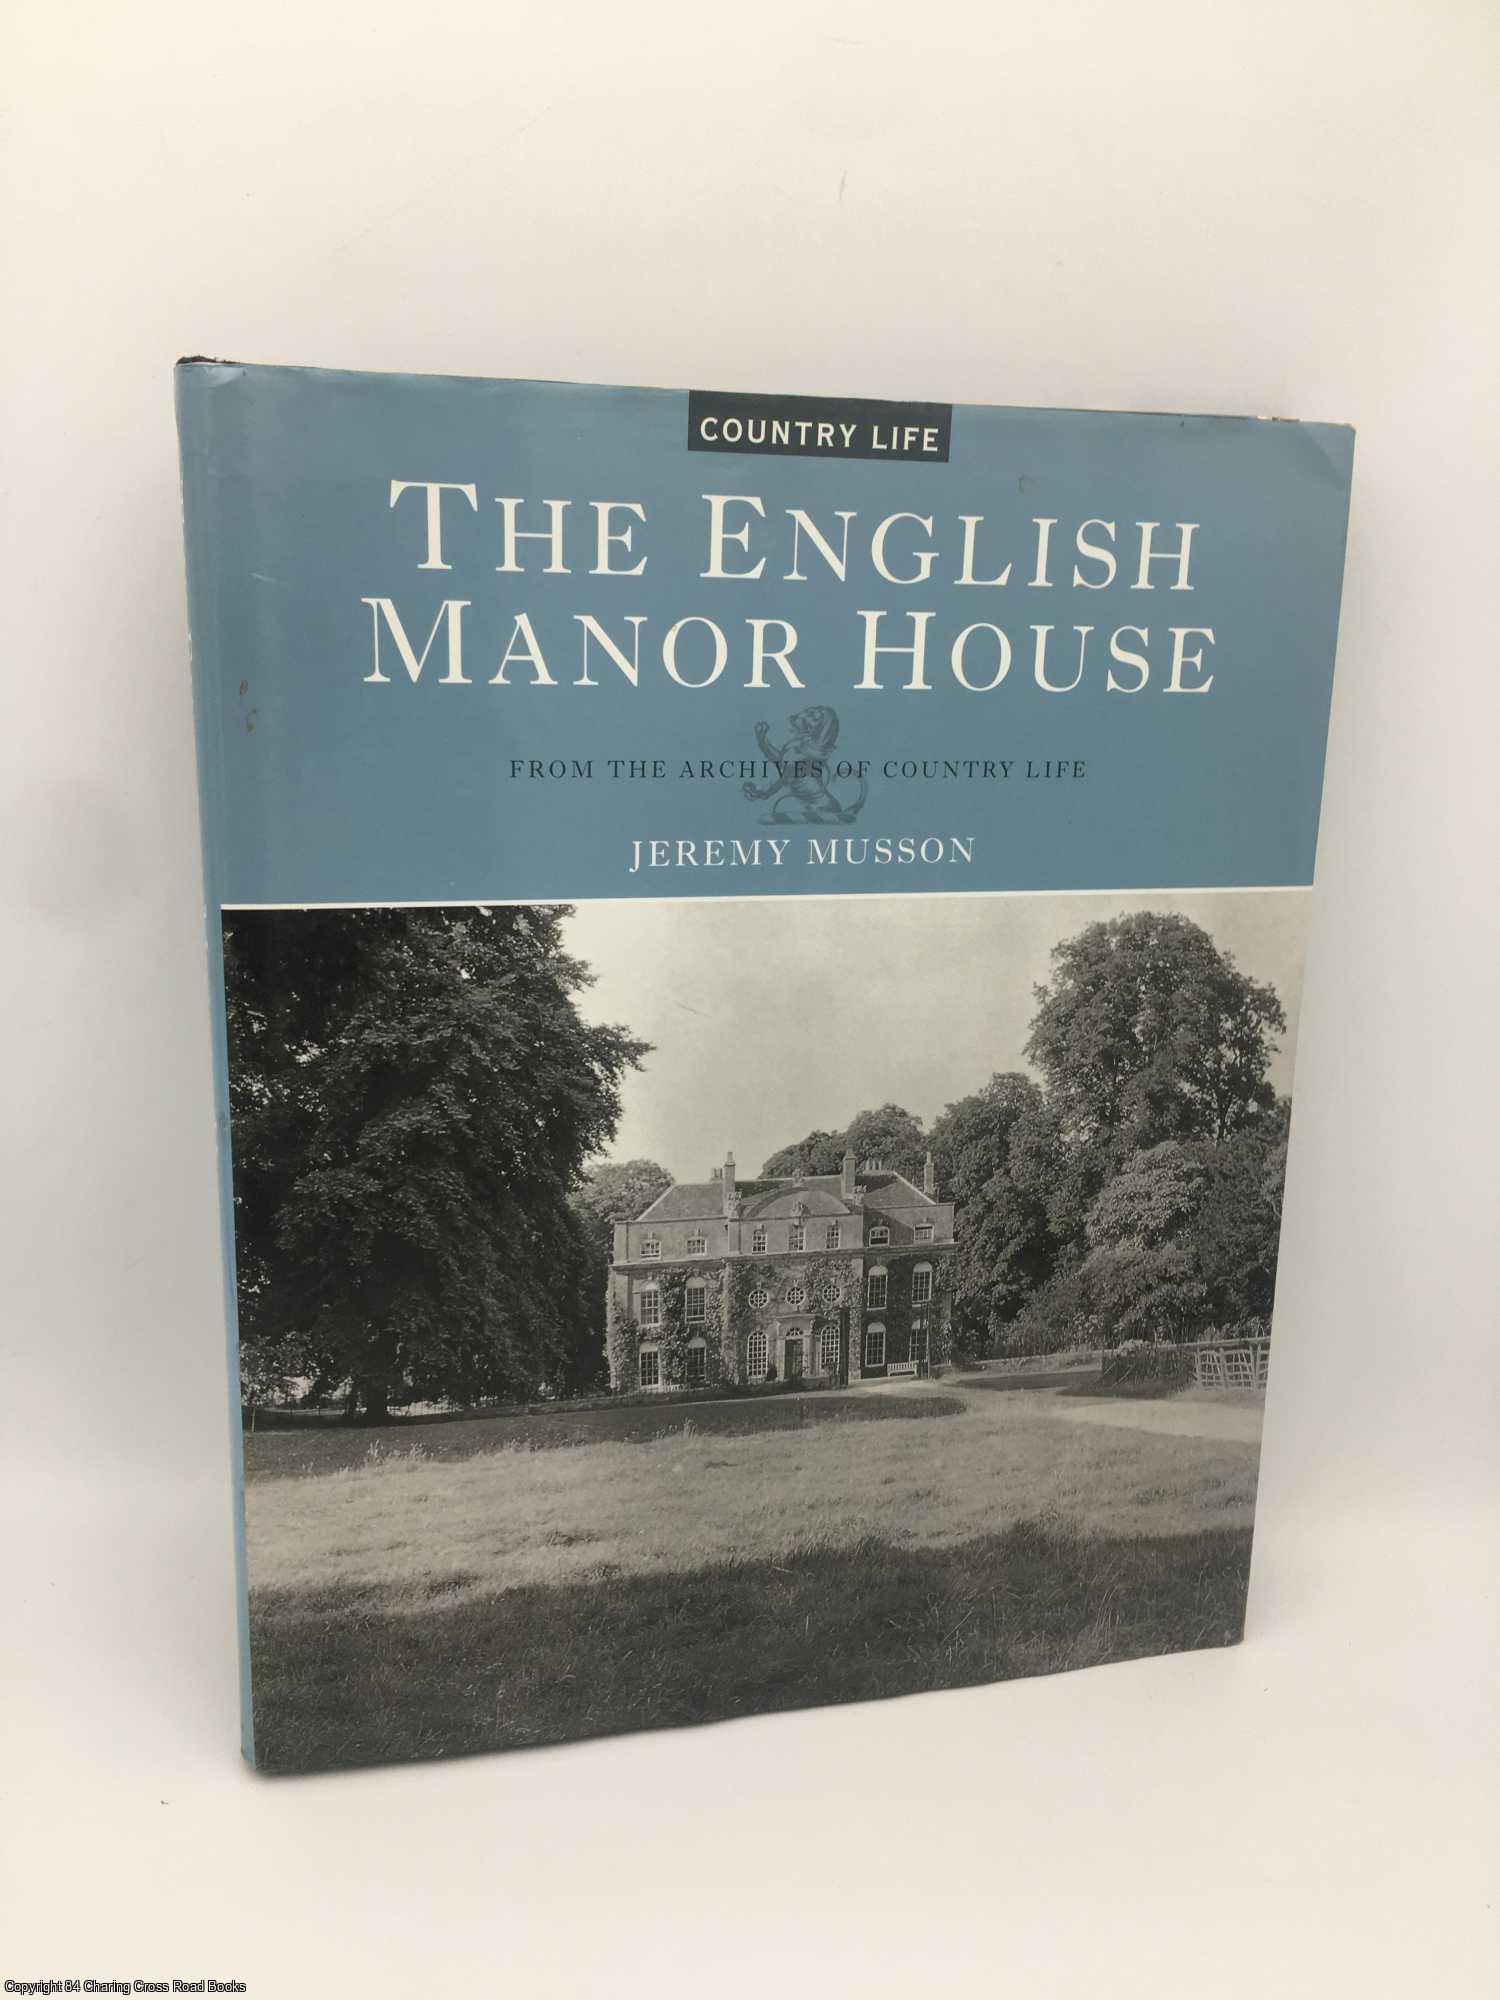 Musson, Jeremy - The English Manor House: From the Archives of Country Life